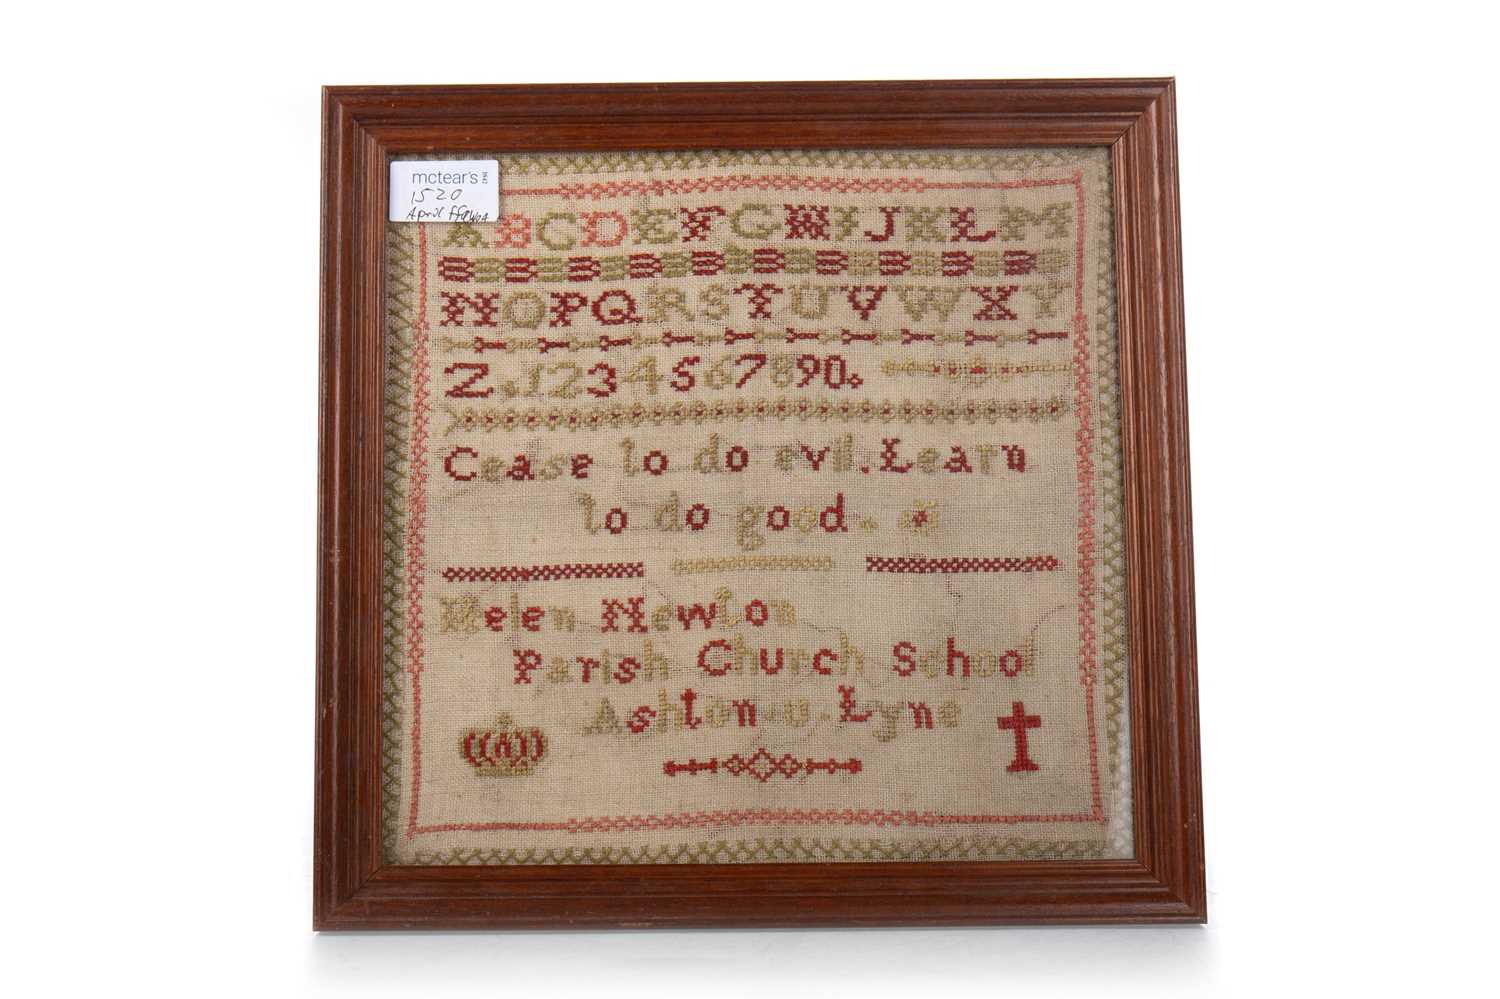 VICTORIAN NEEDLEWORK EMBROIDERY, AND A RELATED VICTORIAN NEEDEWORK SAMPLER - Image 2 of 2